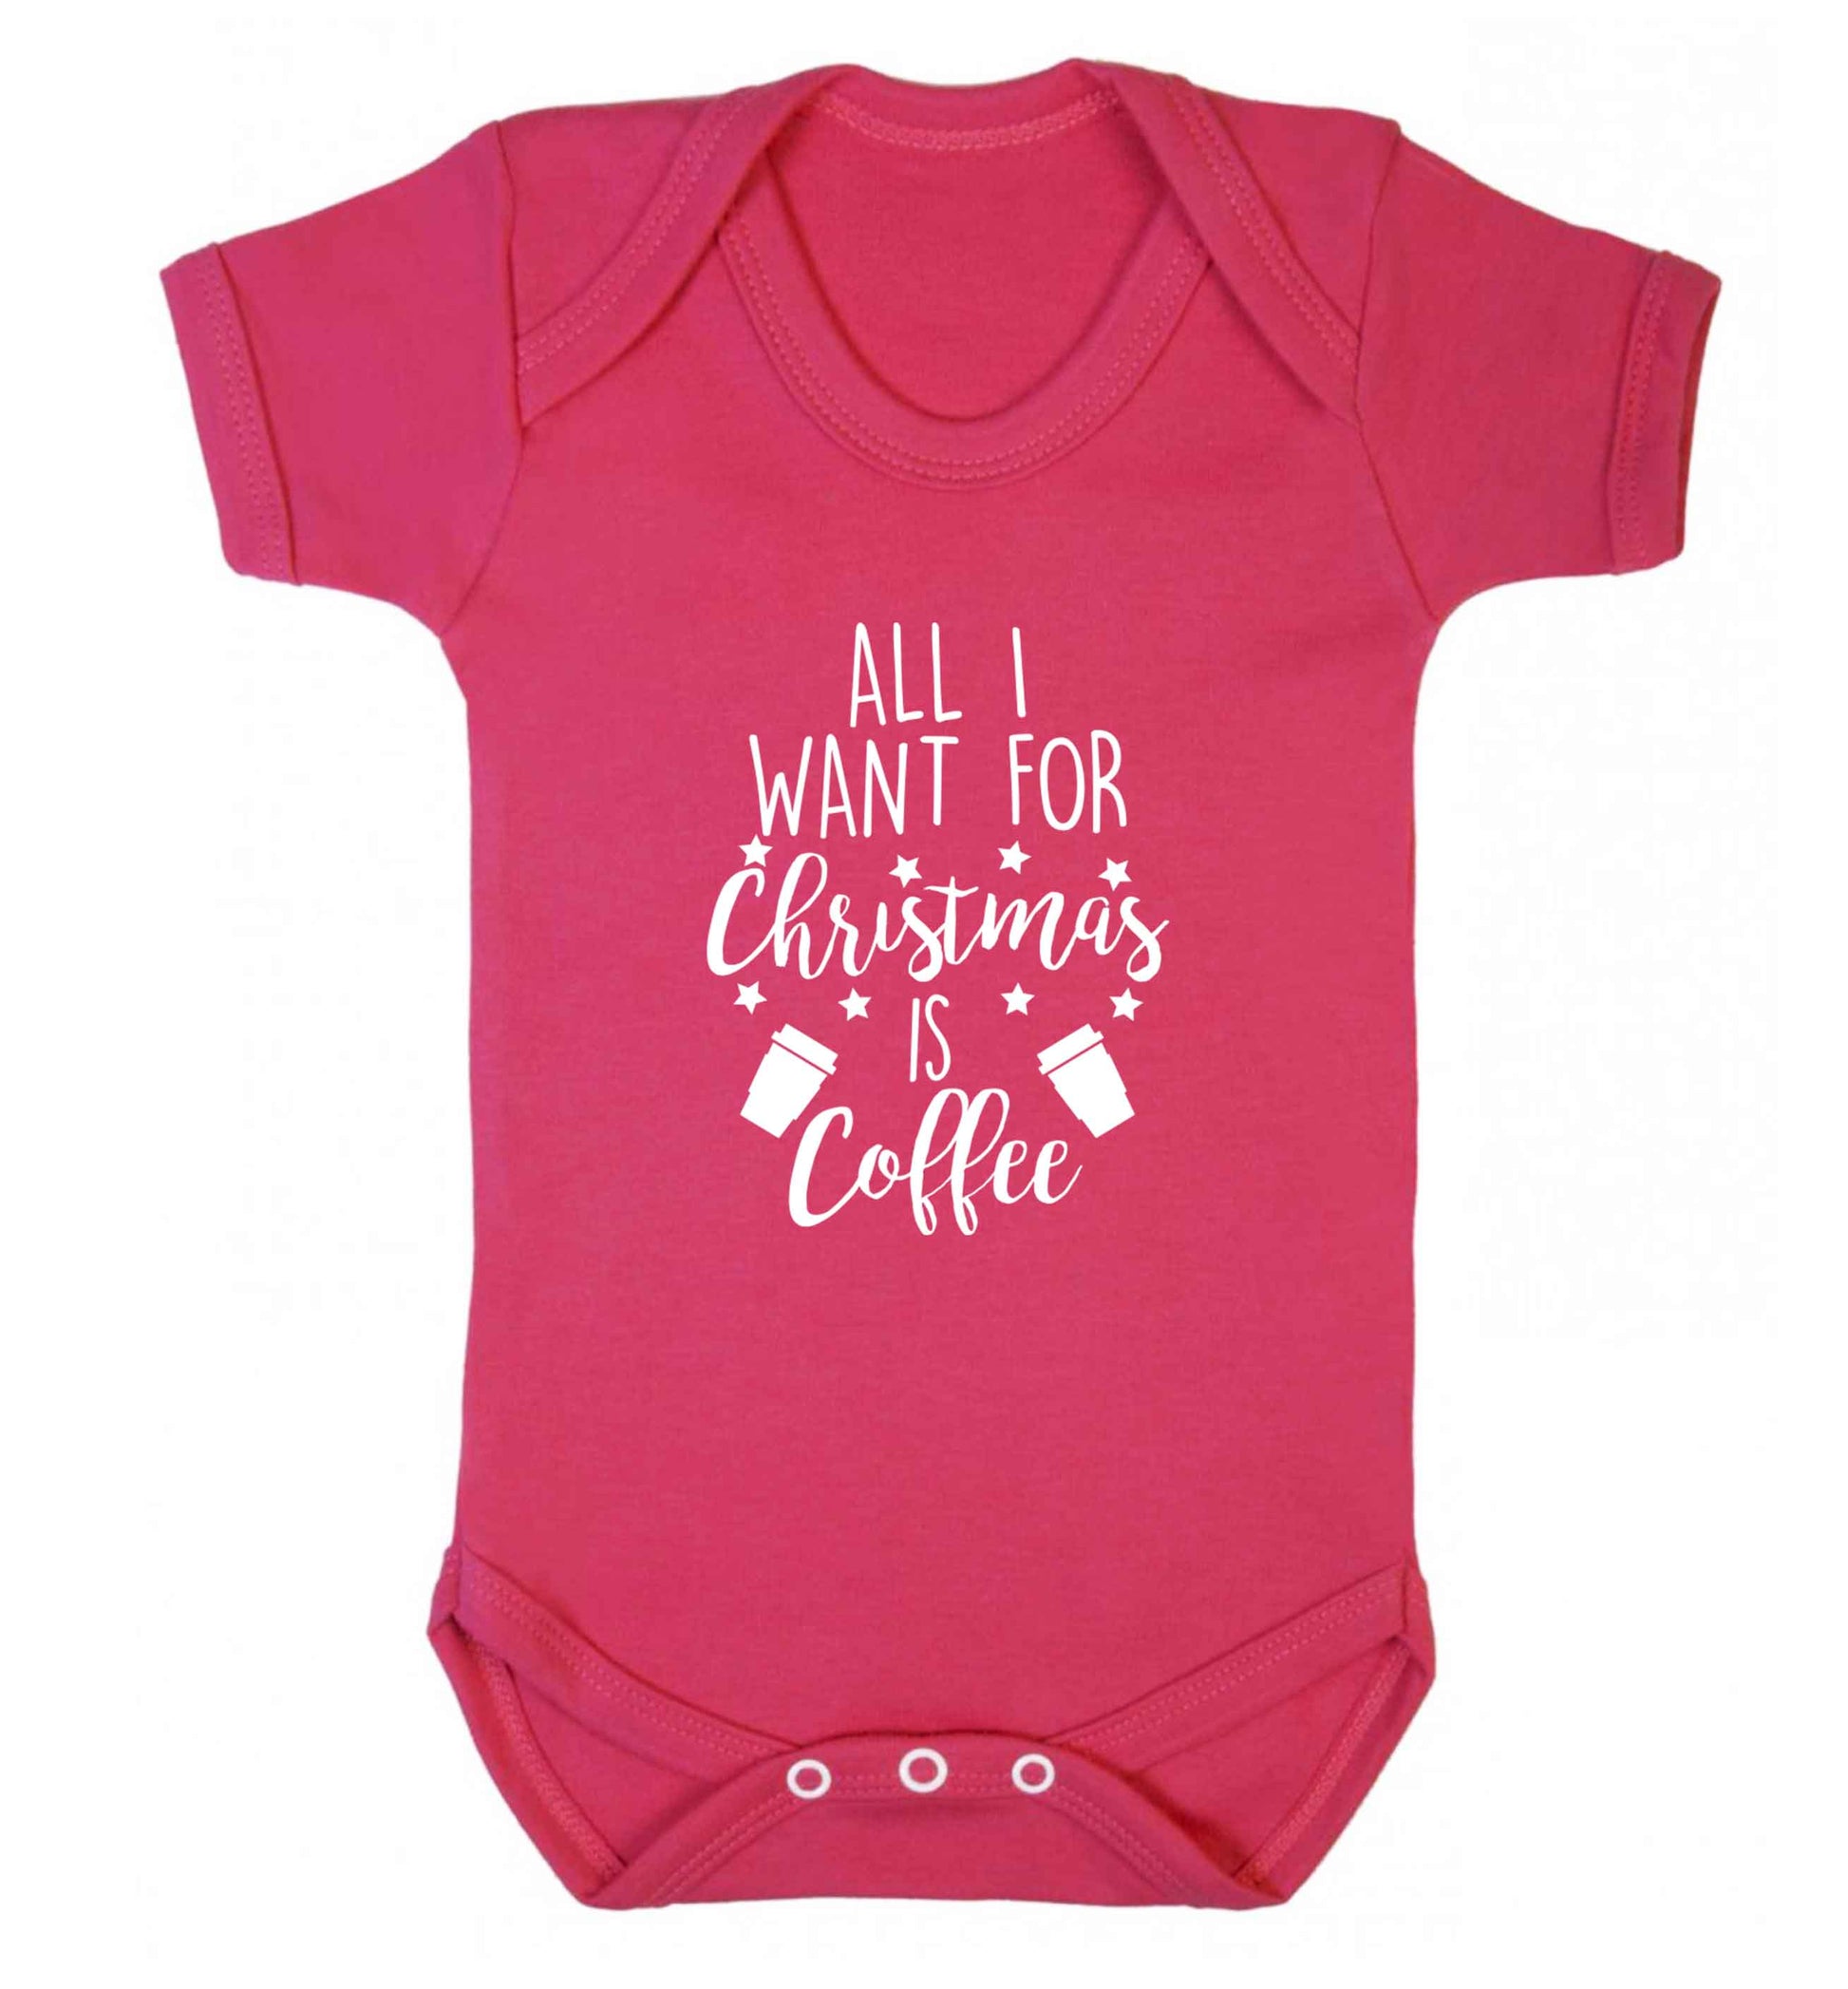 All I want for Christmas is coffee Baby Vest dark pink 18-24 months